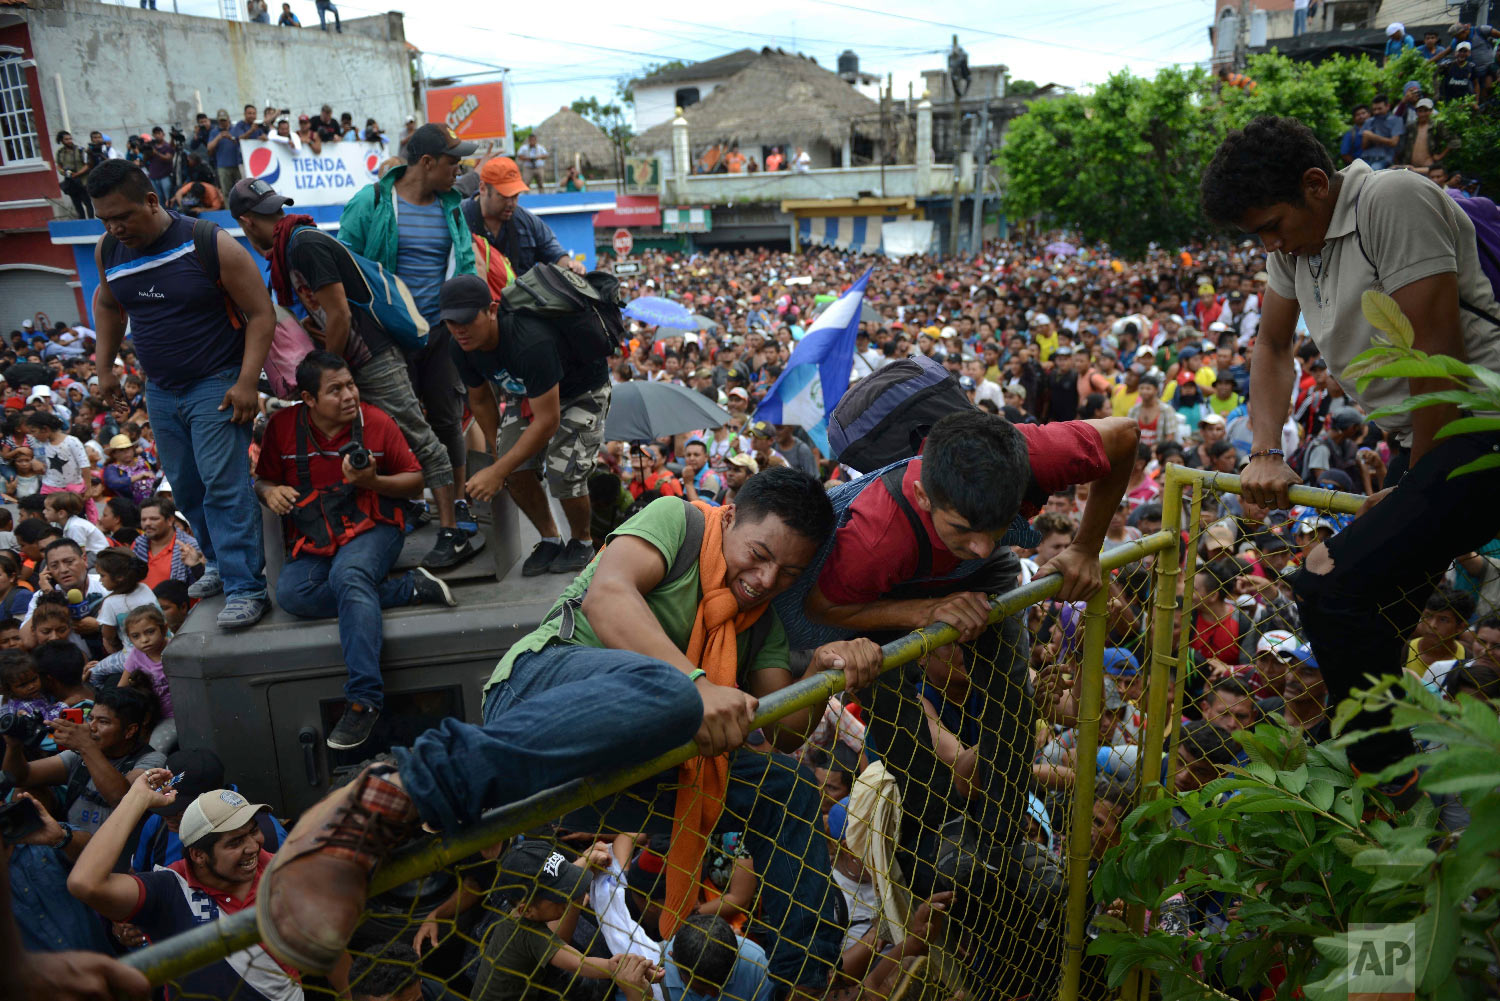  Young men climb over a fence in Tecun Uman, Guatemala, as thousands of Central American migrants rush across the border towards Mexico on Oct. 19, 2018. (AP Photo/Oliver de Ros) 